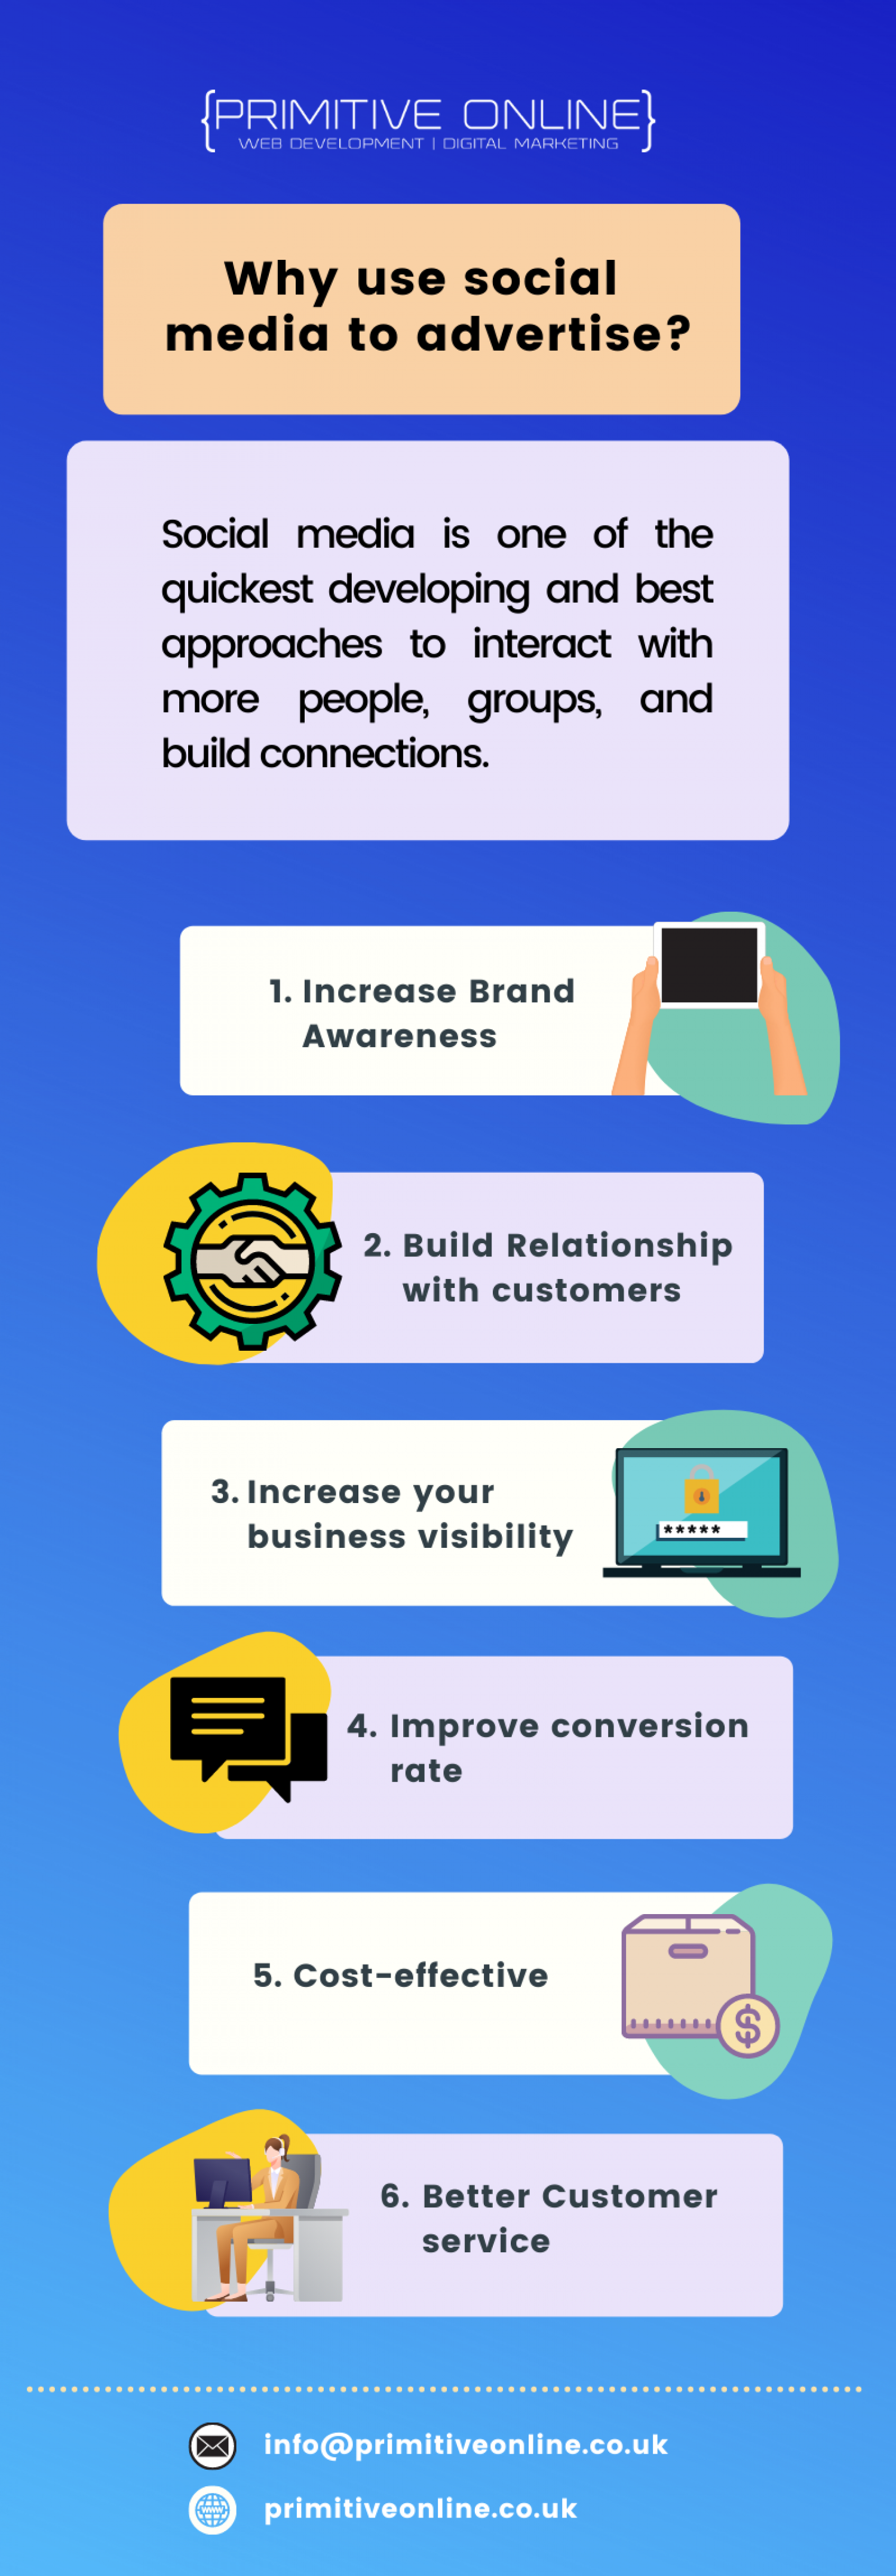 Why Use Social Media to Advertise Infographic